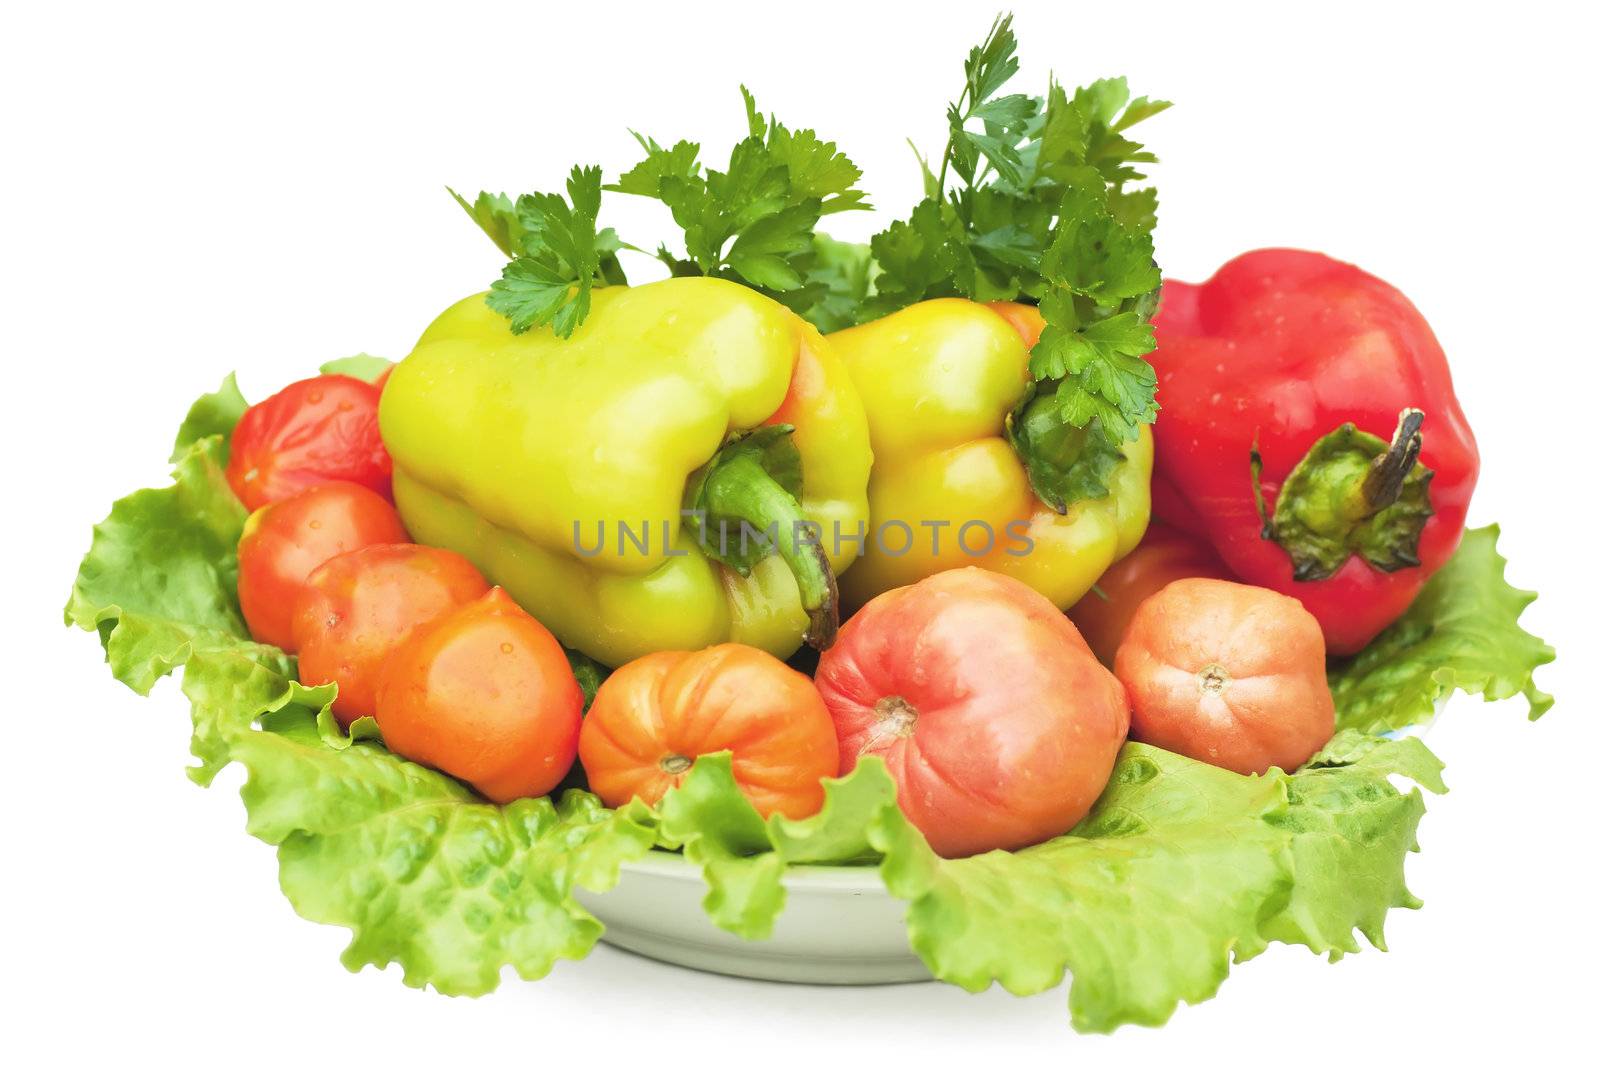 Healthy vegetables (peppers, tomatos, lettuce, parsley) on a plate isolated over white.